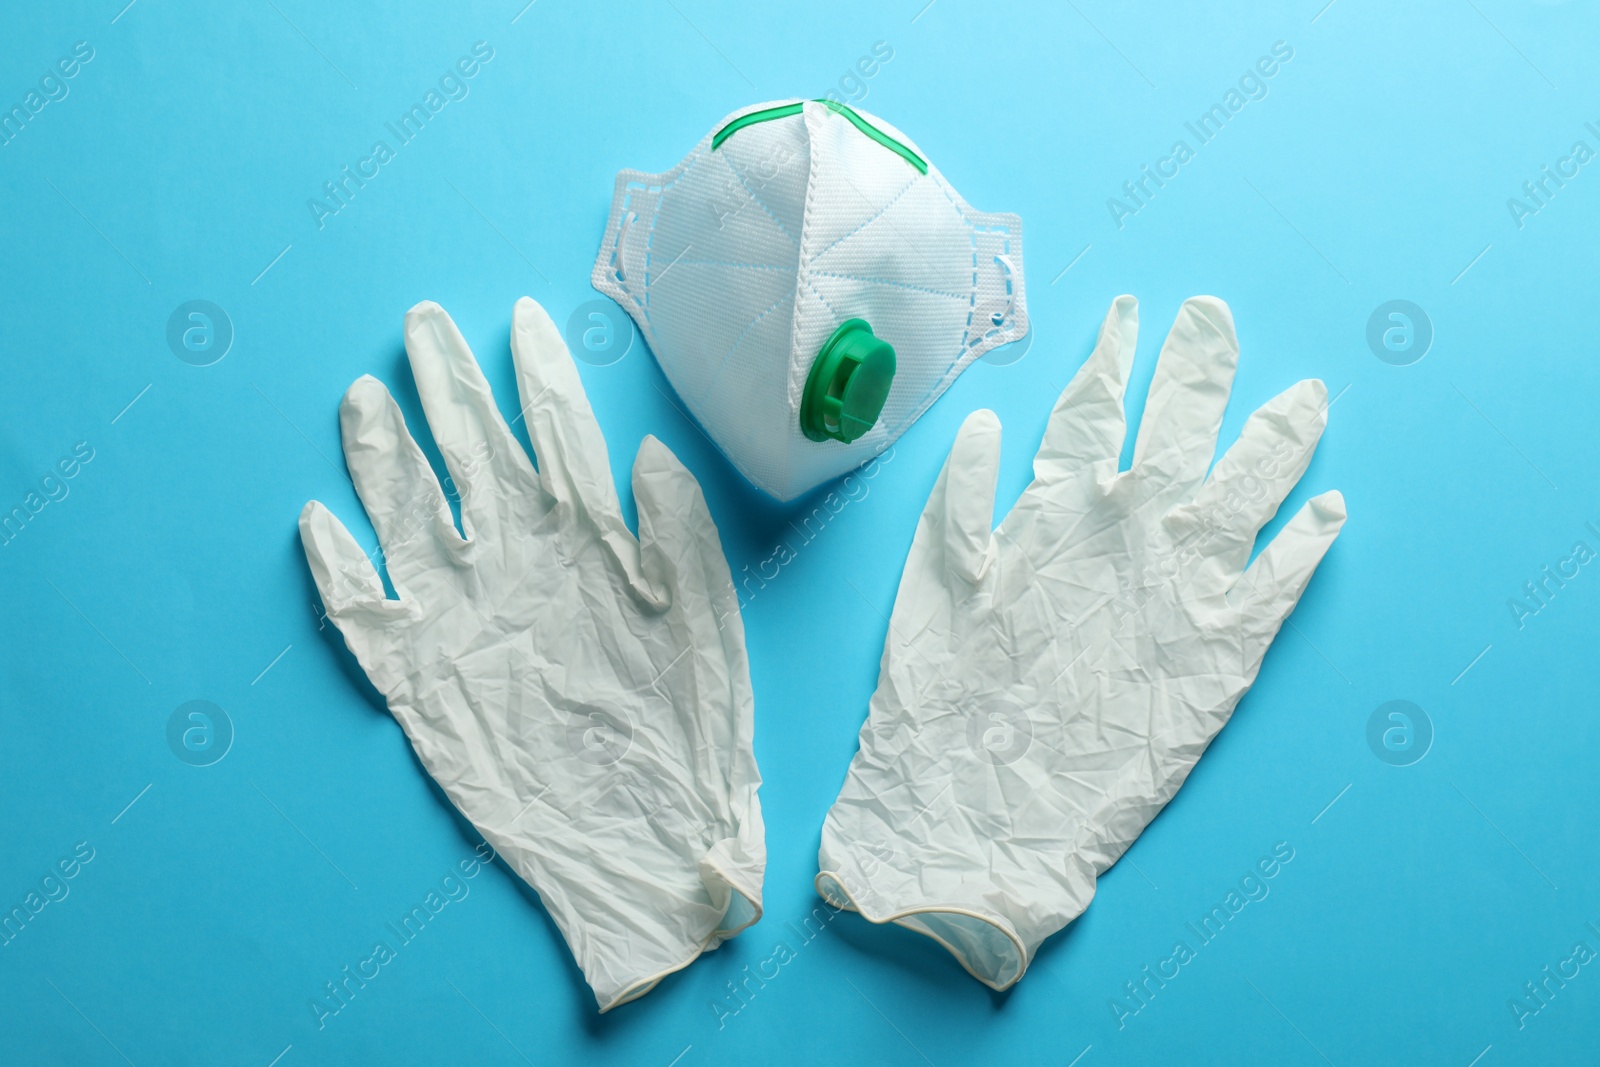 Photo of Medical gloves and respiratory mask on light blue background, flat lay. Safety equipment